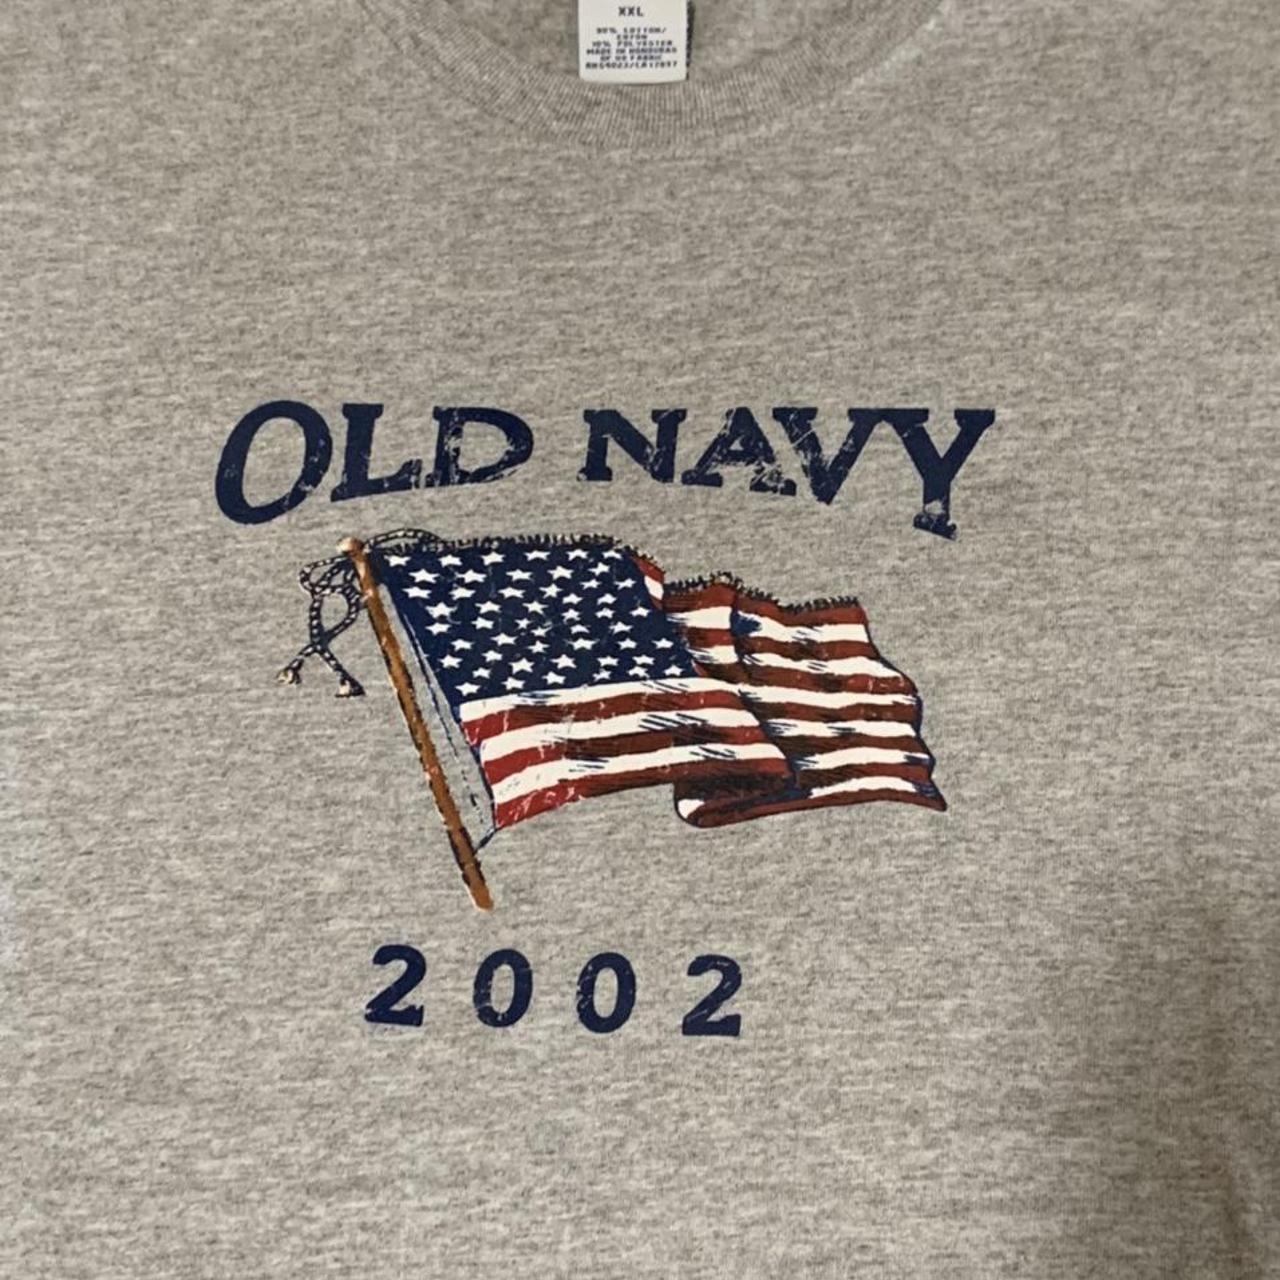 Old Navy Flag T Shirt 1994-2002(XXL) – The Collectors Vintage